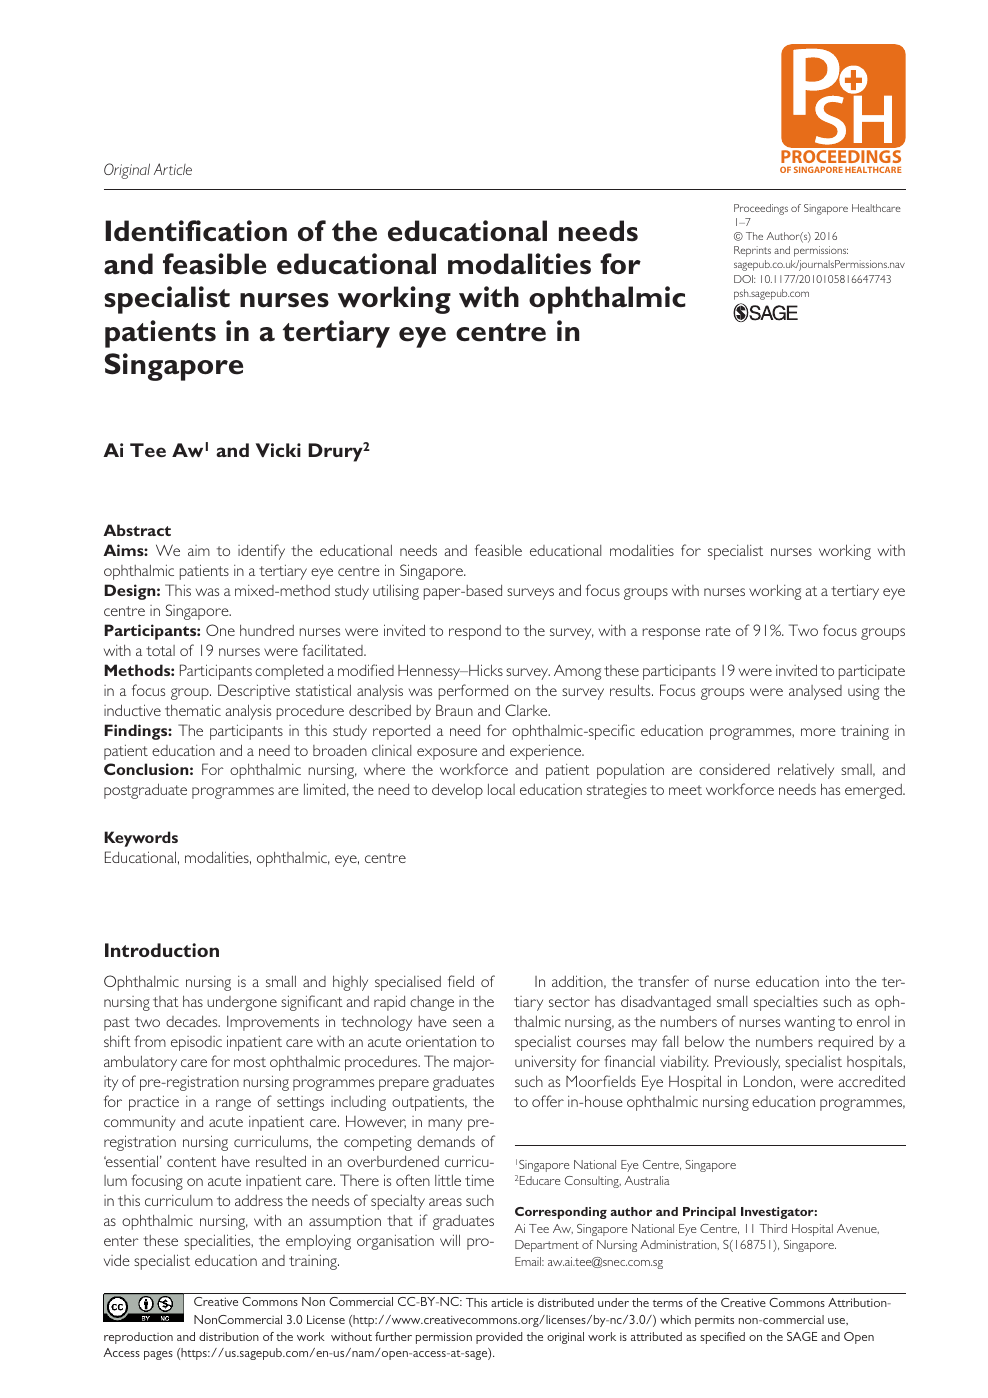 Identification Of The Educational Needs And Feasible Educational Modalities For Specialist Nurses Working With Ophthalmic Patients In A Tertiary Eye Centre In Singapore Topic Of Research Paper In Clinical Medicine Download